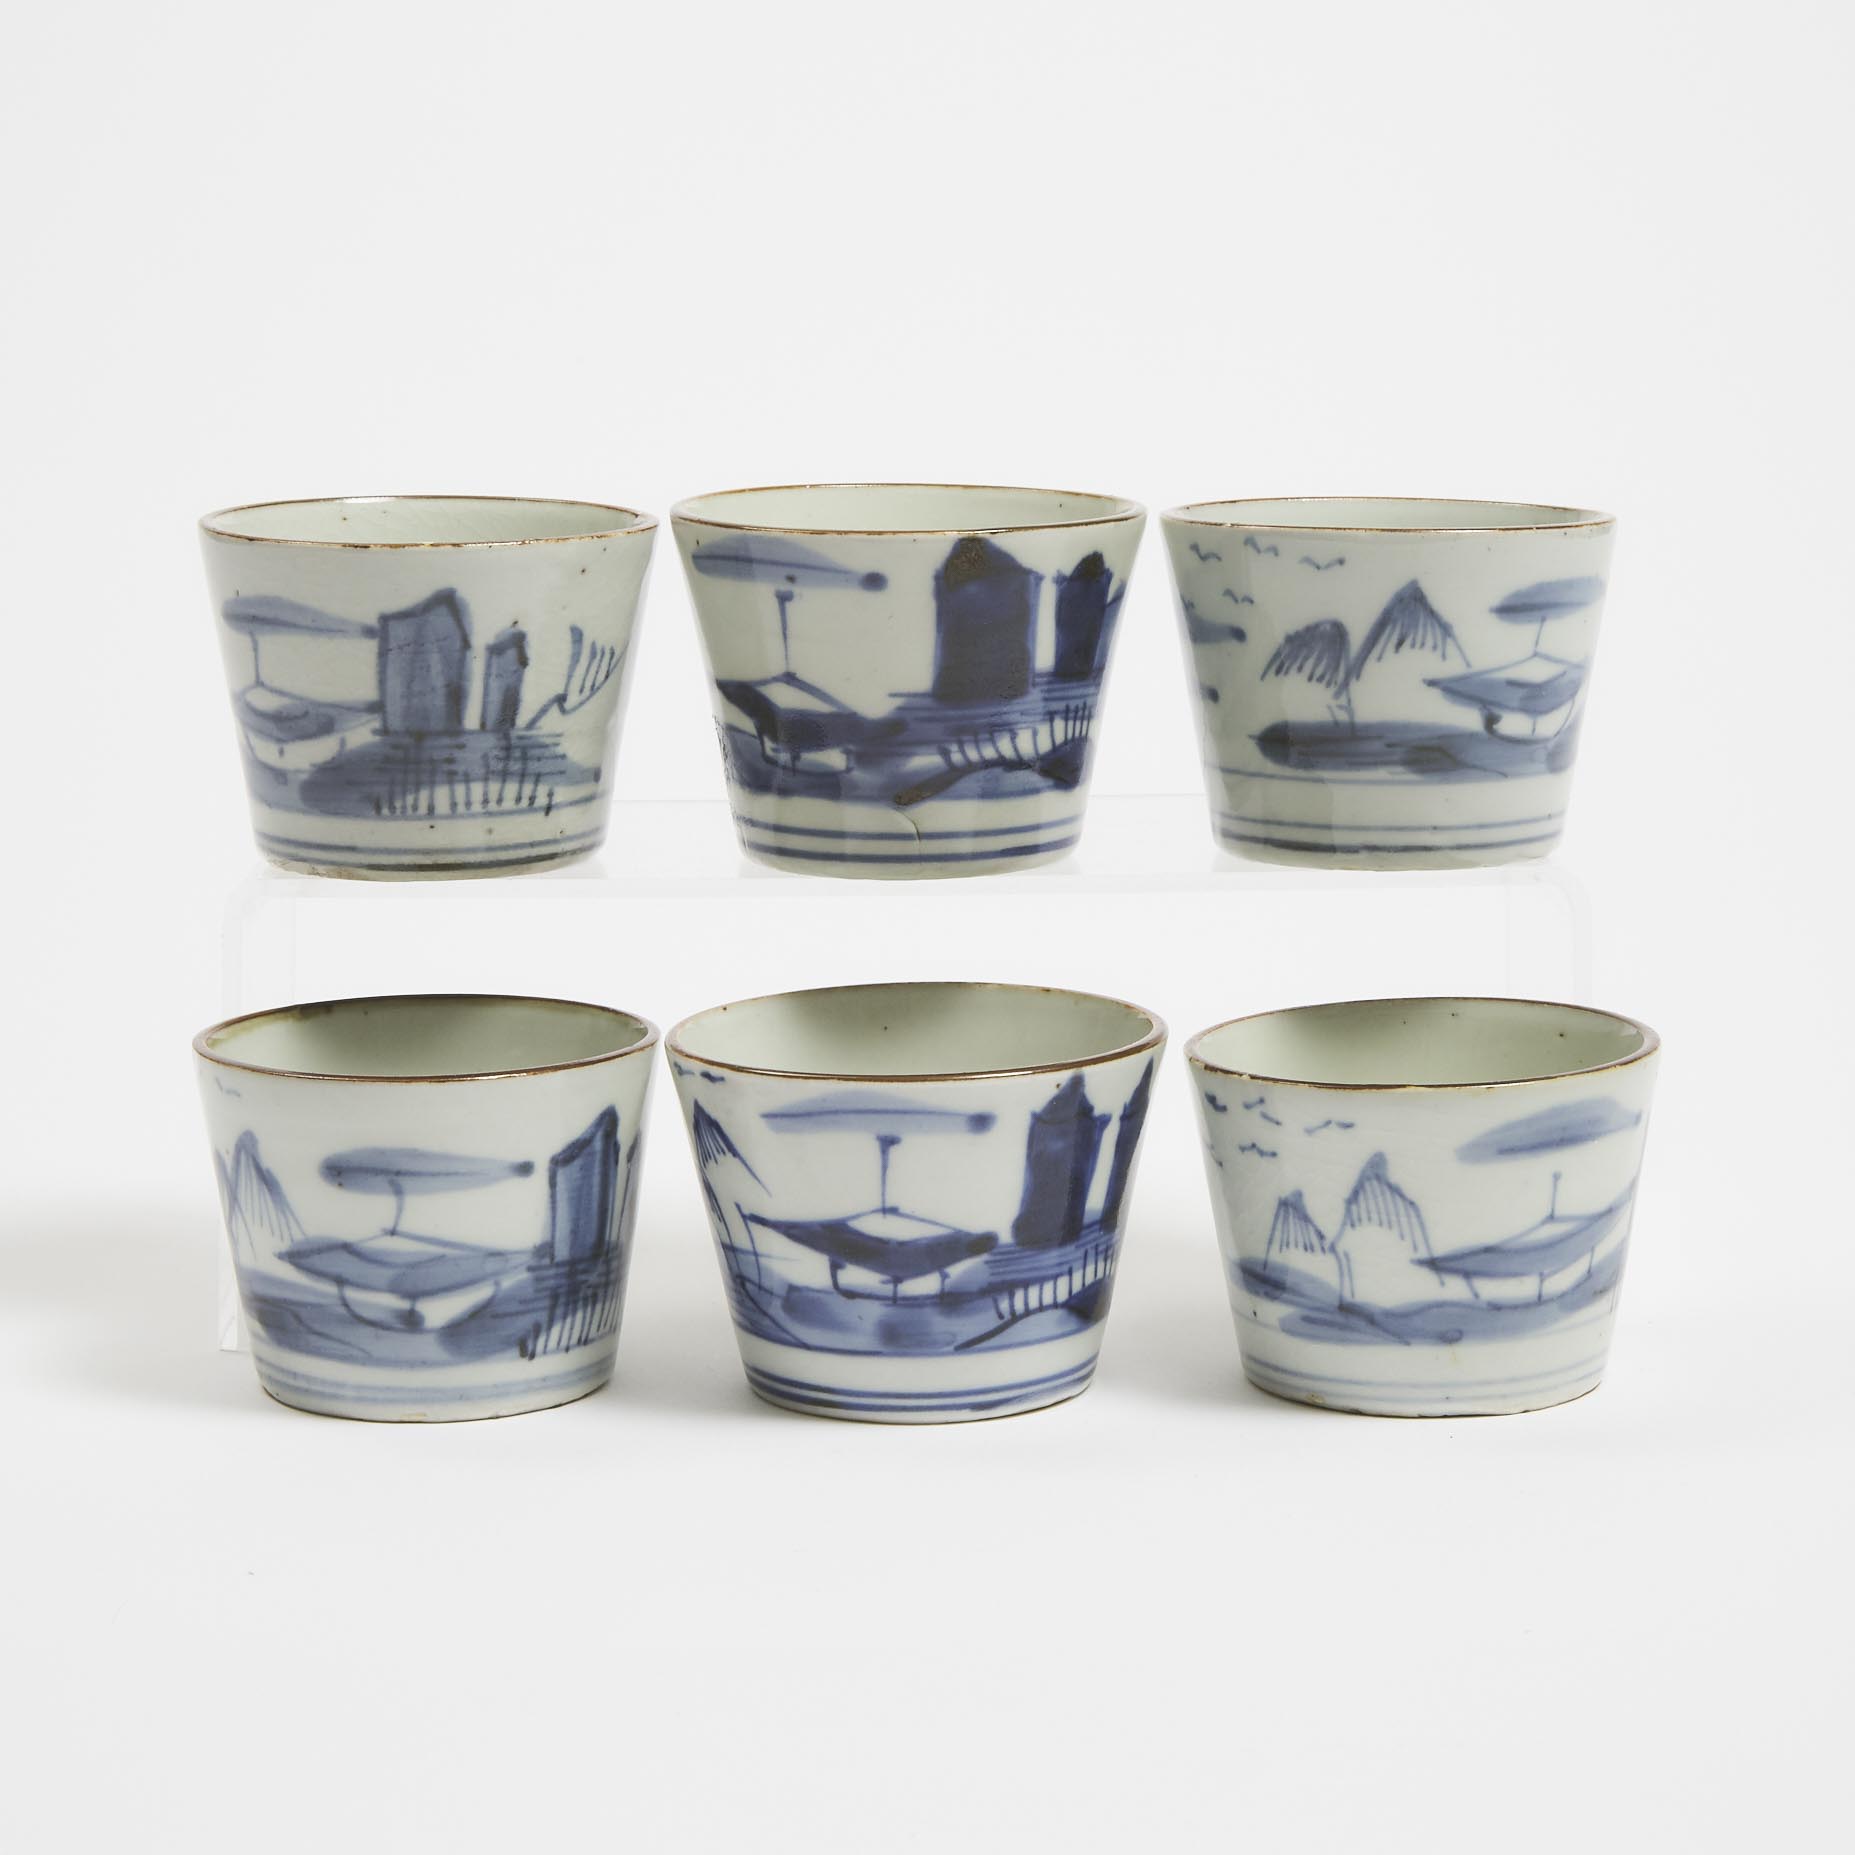 A Set of Six Blue and White Cafe-au-Lait Rimmed Tea Cups, 19th Century